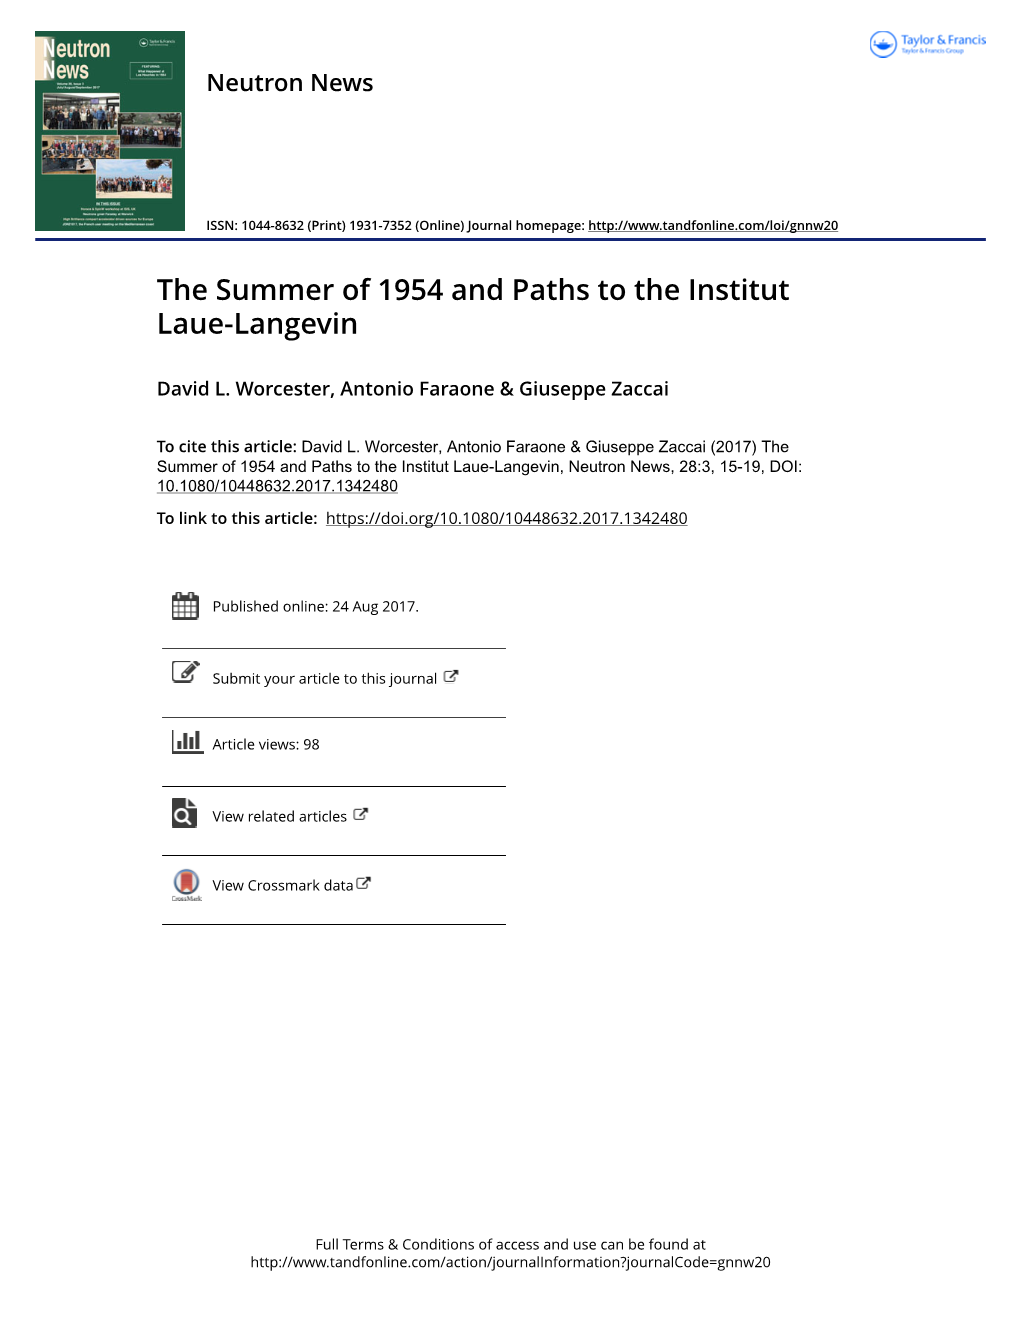 The Summer of 1954 and Paths to the Institut Laue-Langevin